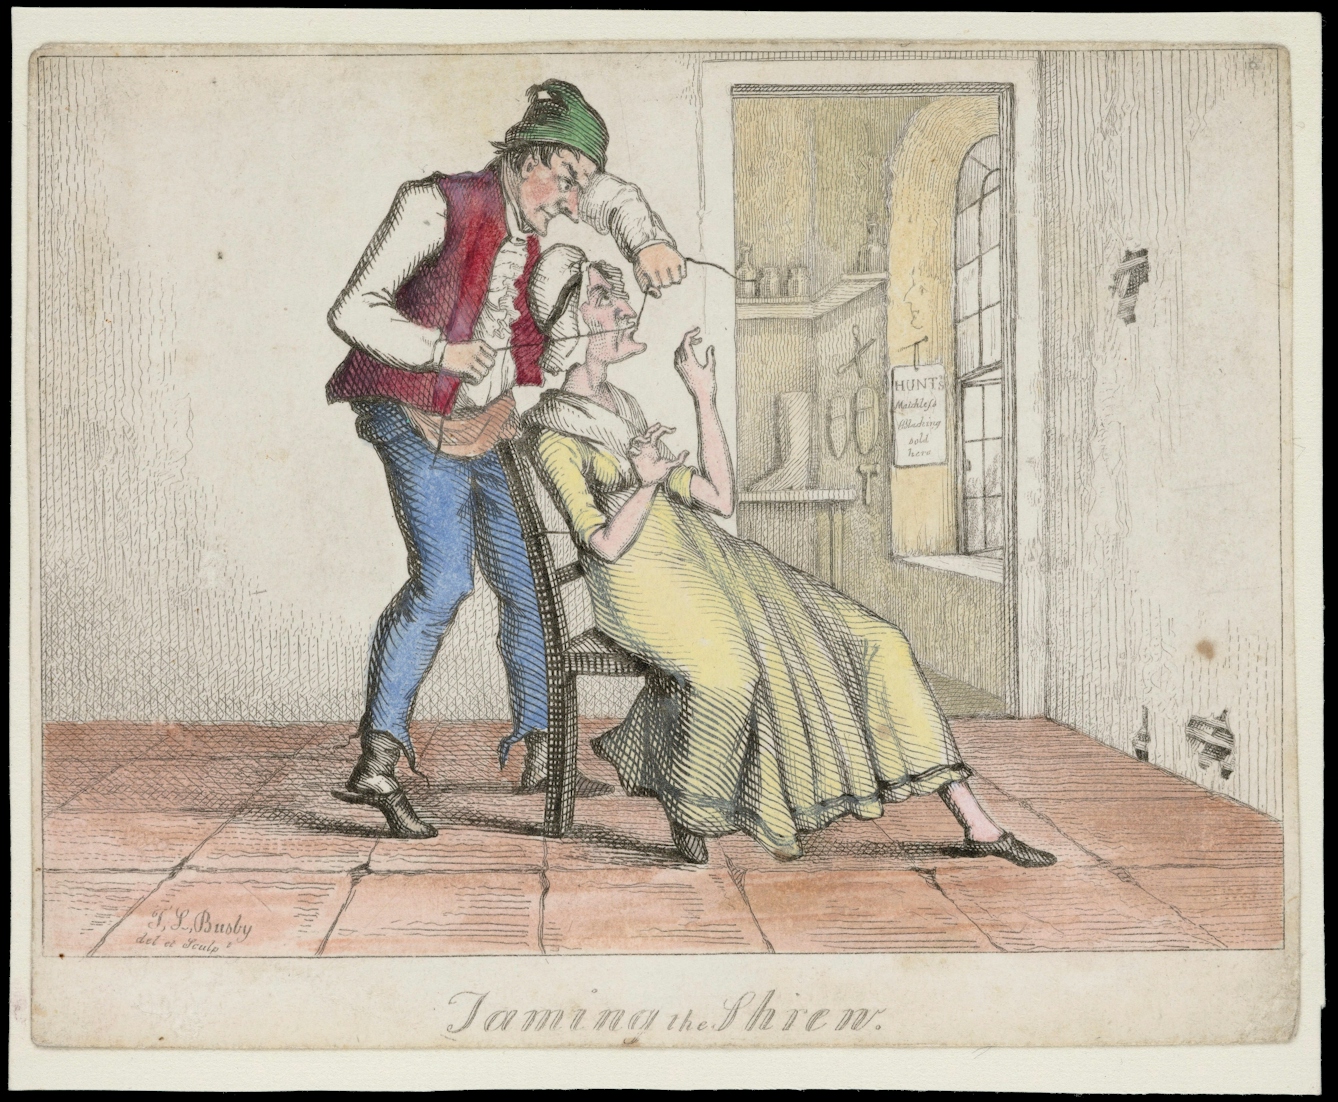 Coloured etching showing a shopkeeper sewing up his wife's mouth to apparently stop her from nagging.